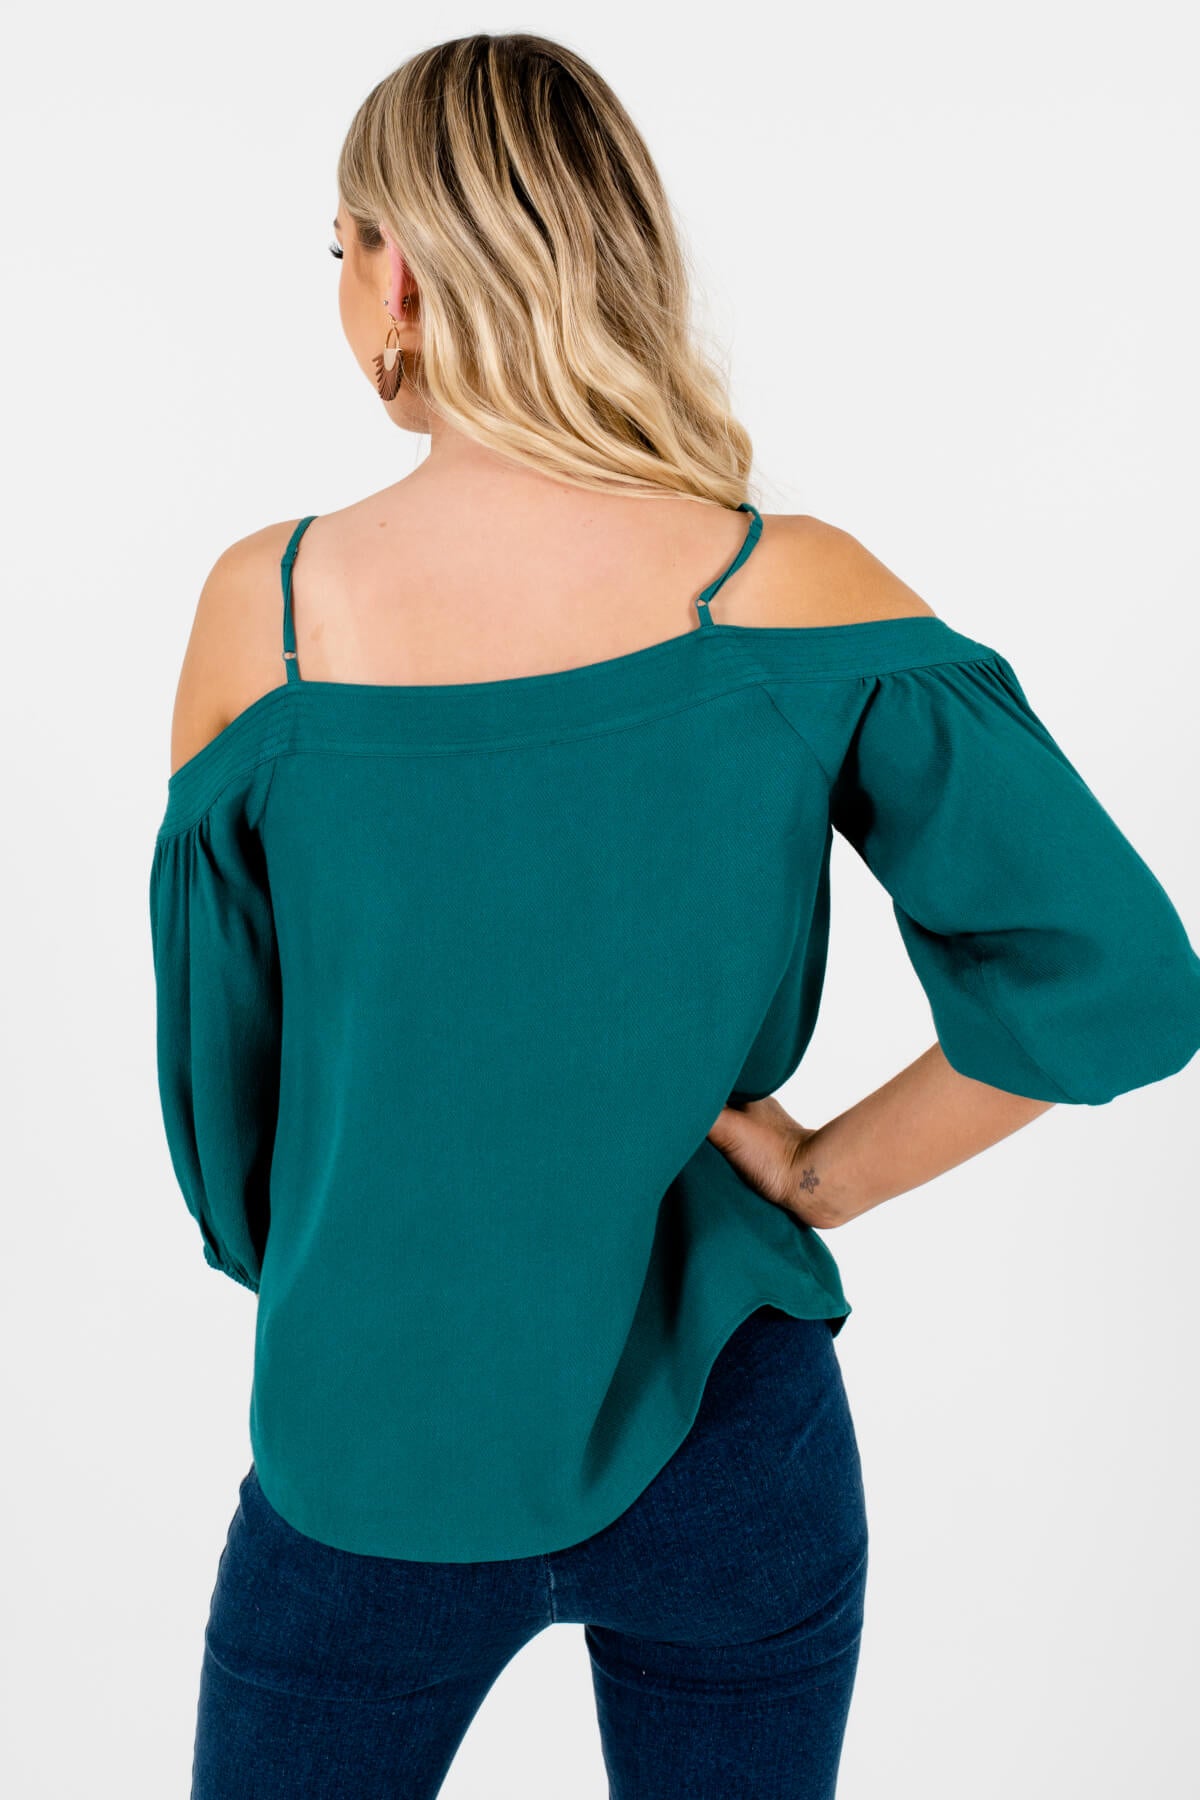 Women's Teal Green Adjustable Spaghetti Strap Boutique Tops